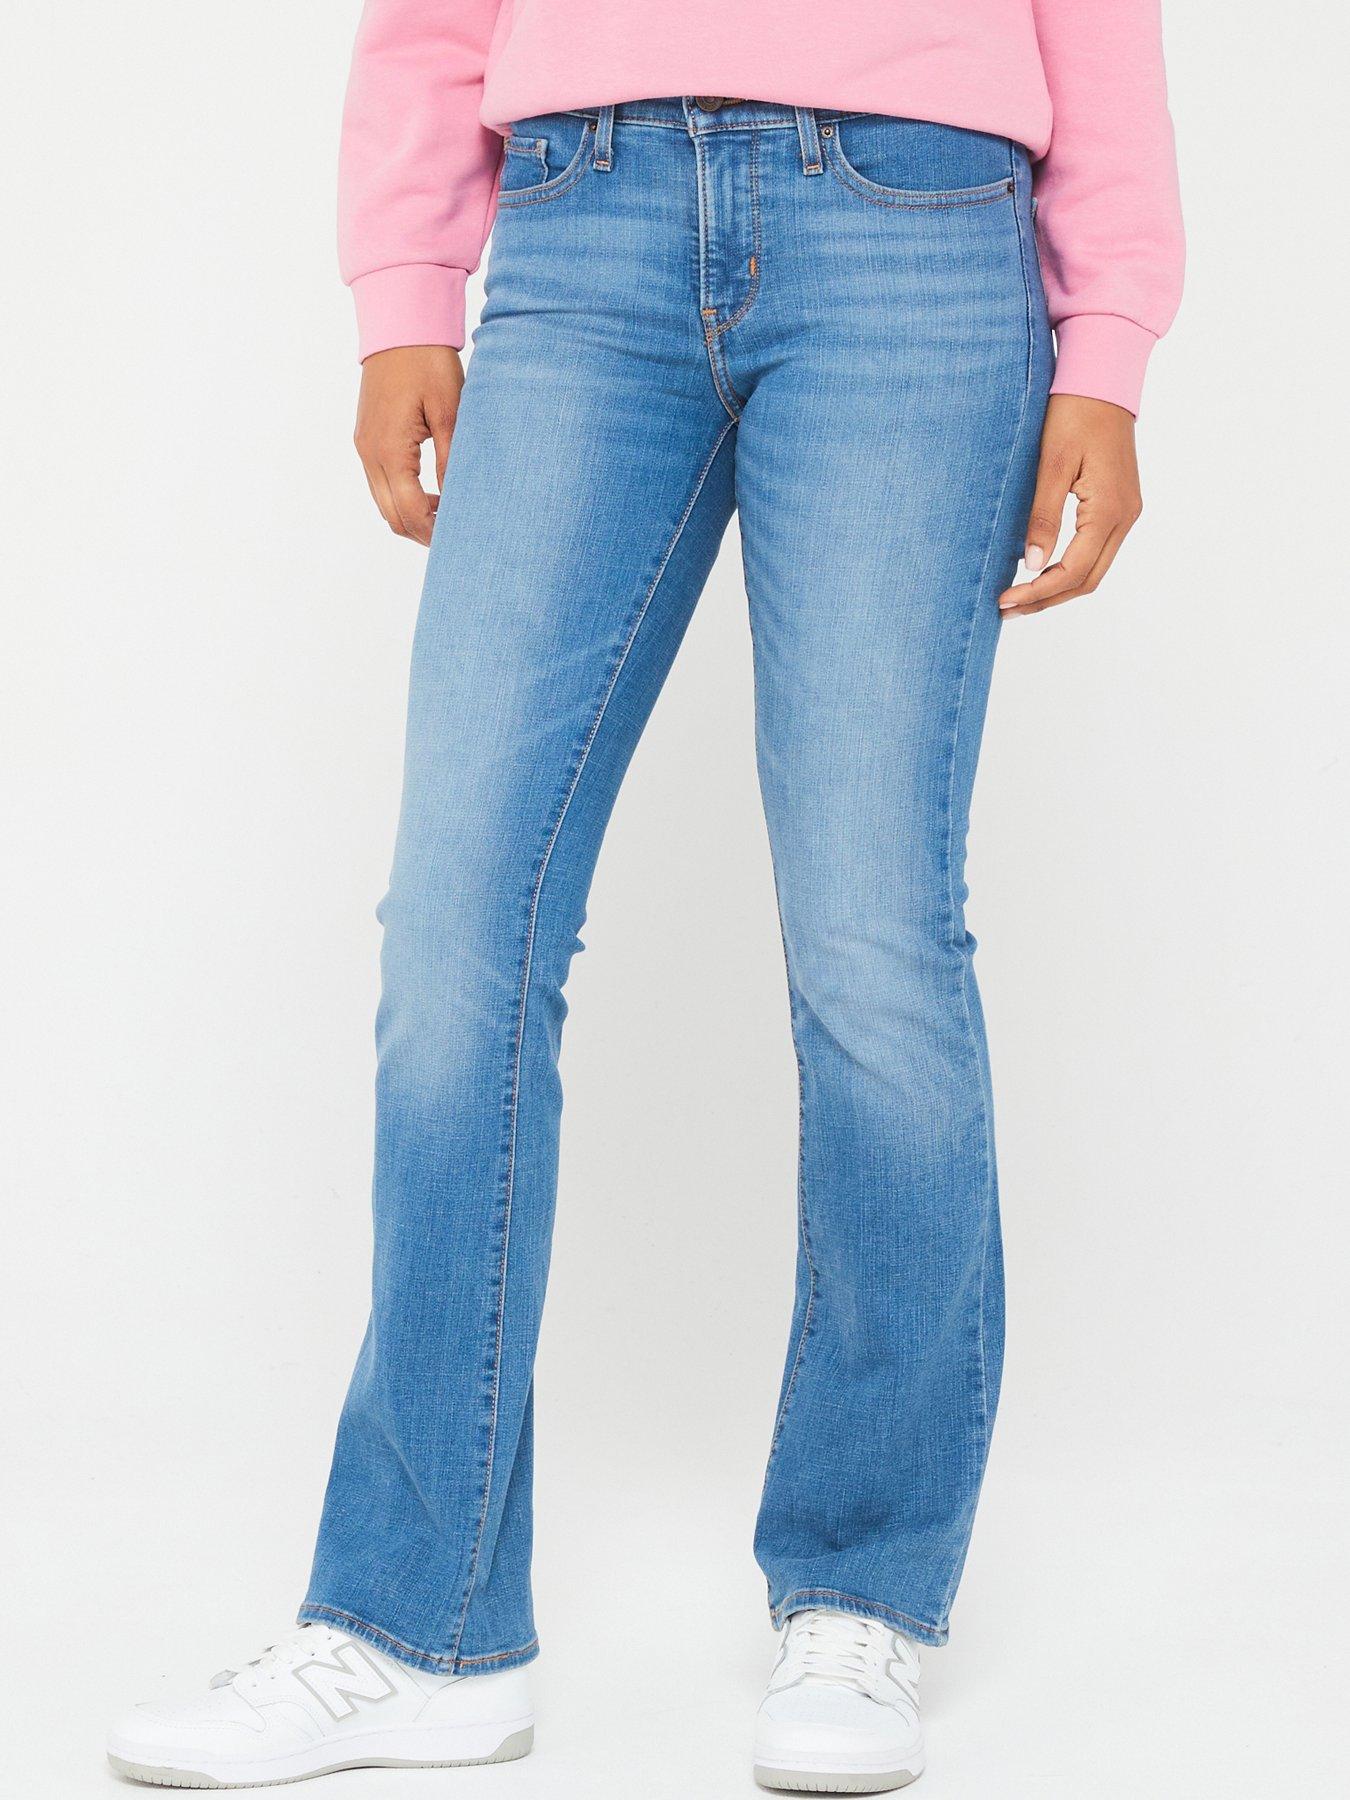 Very light blue bootcut jeans in responsible cotton